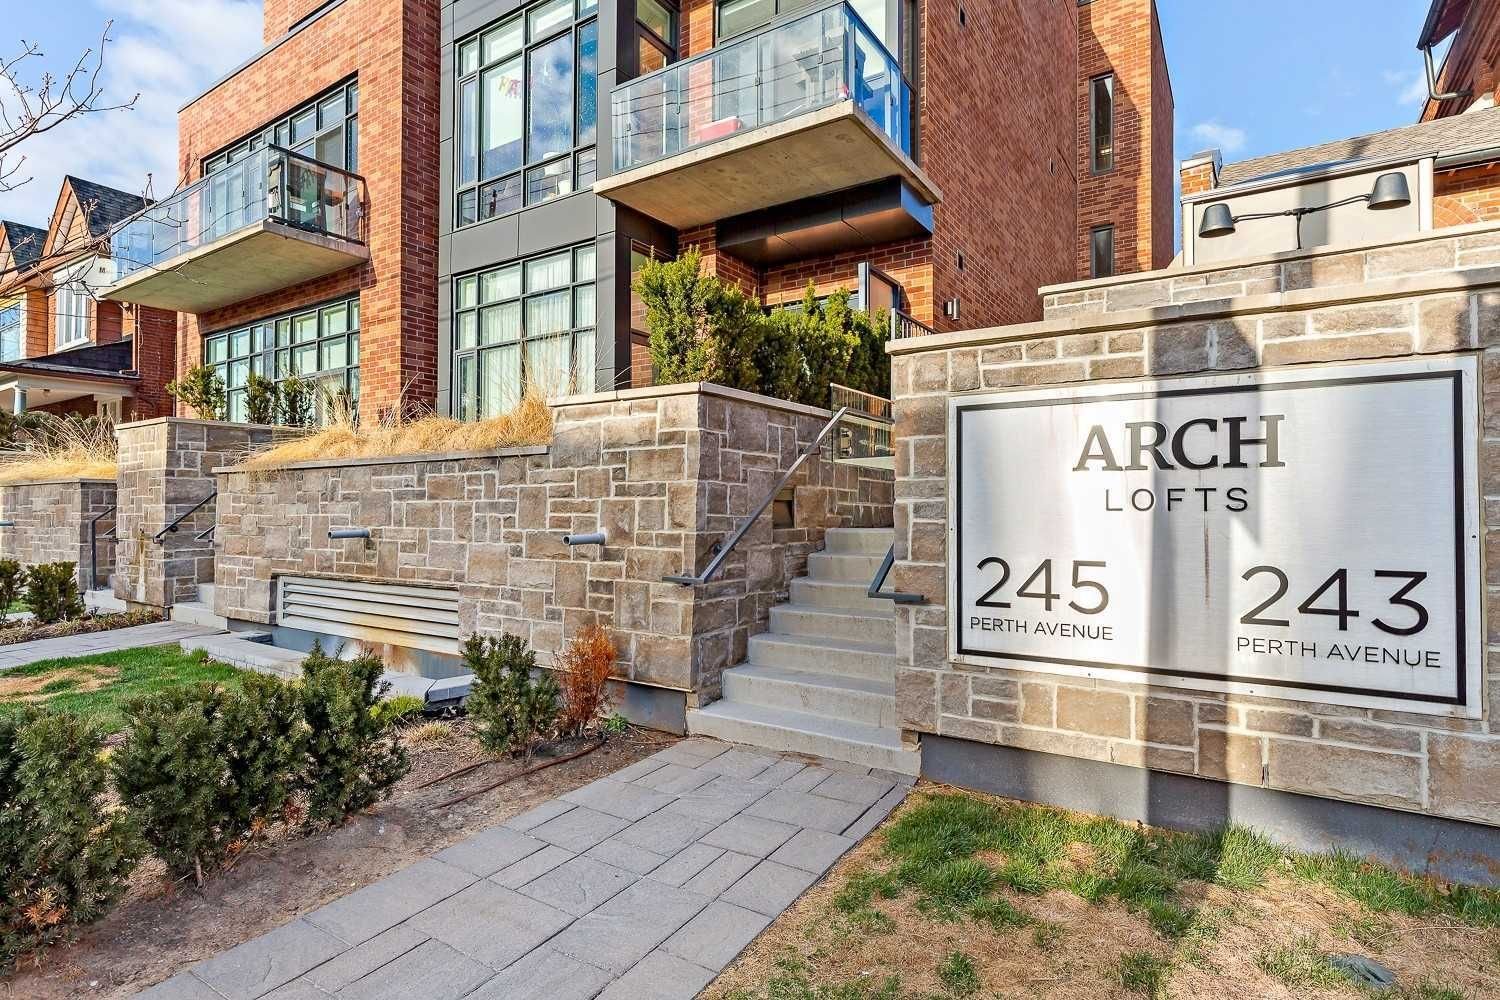 Arch Lofts located at 245 Perth Ave 0